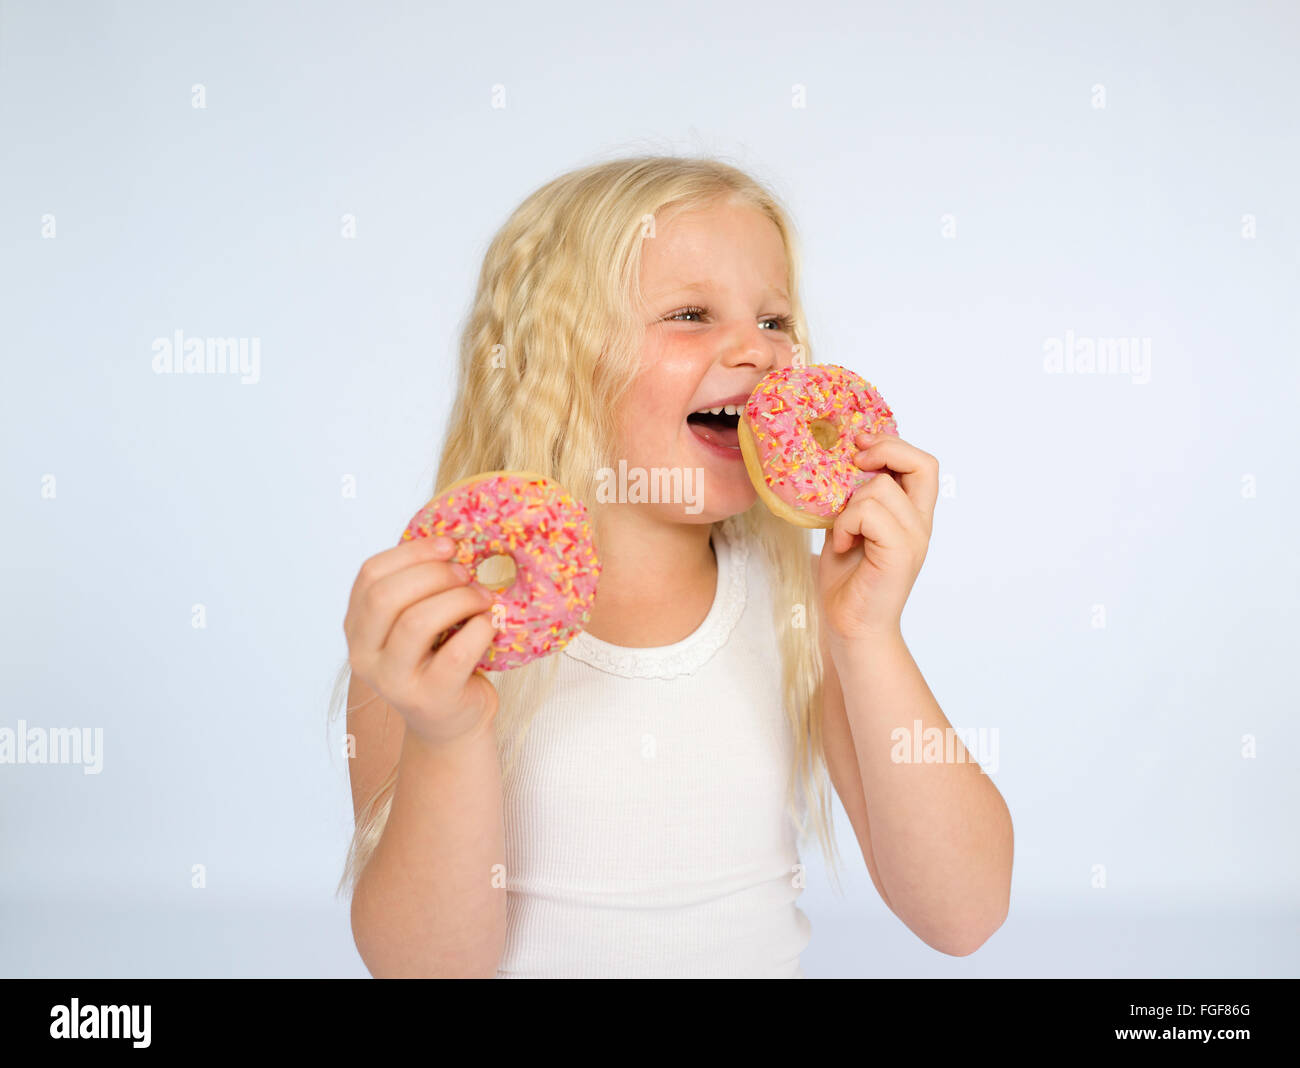 Young girl with long blonde hair holding two pink iced donuts, laughing Stock Photo